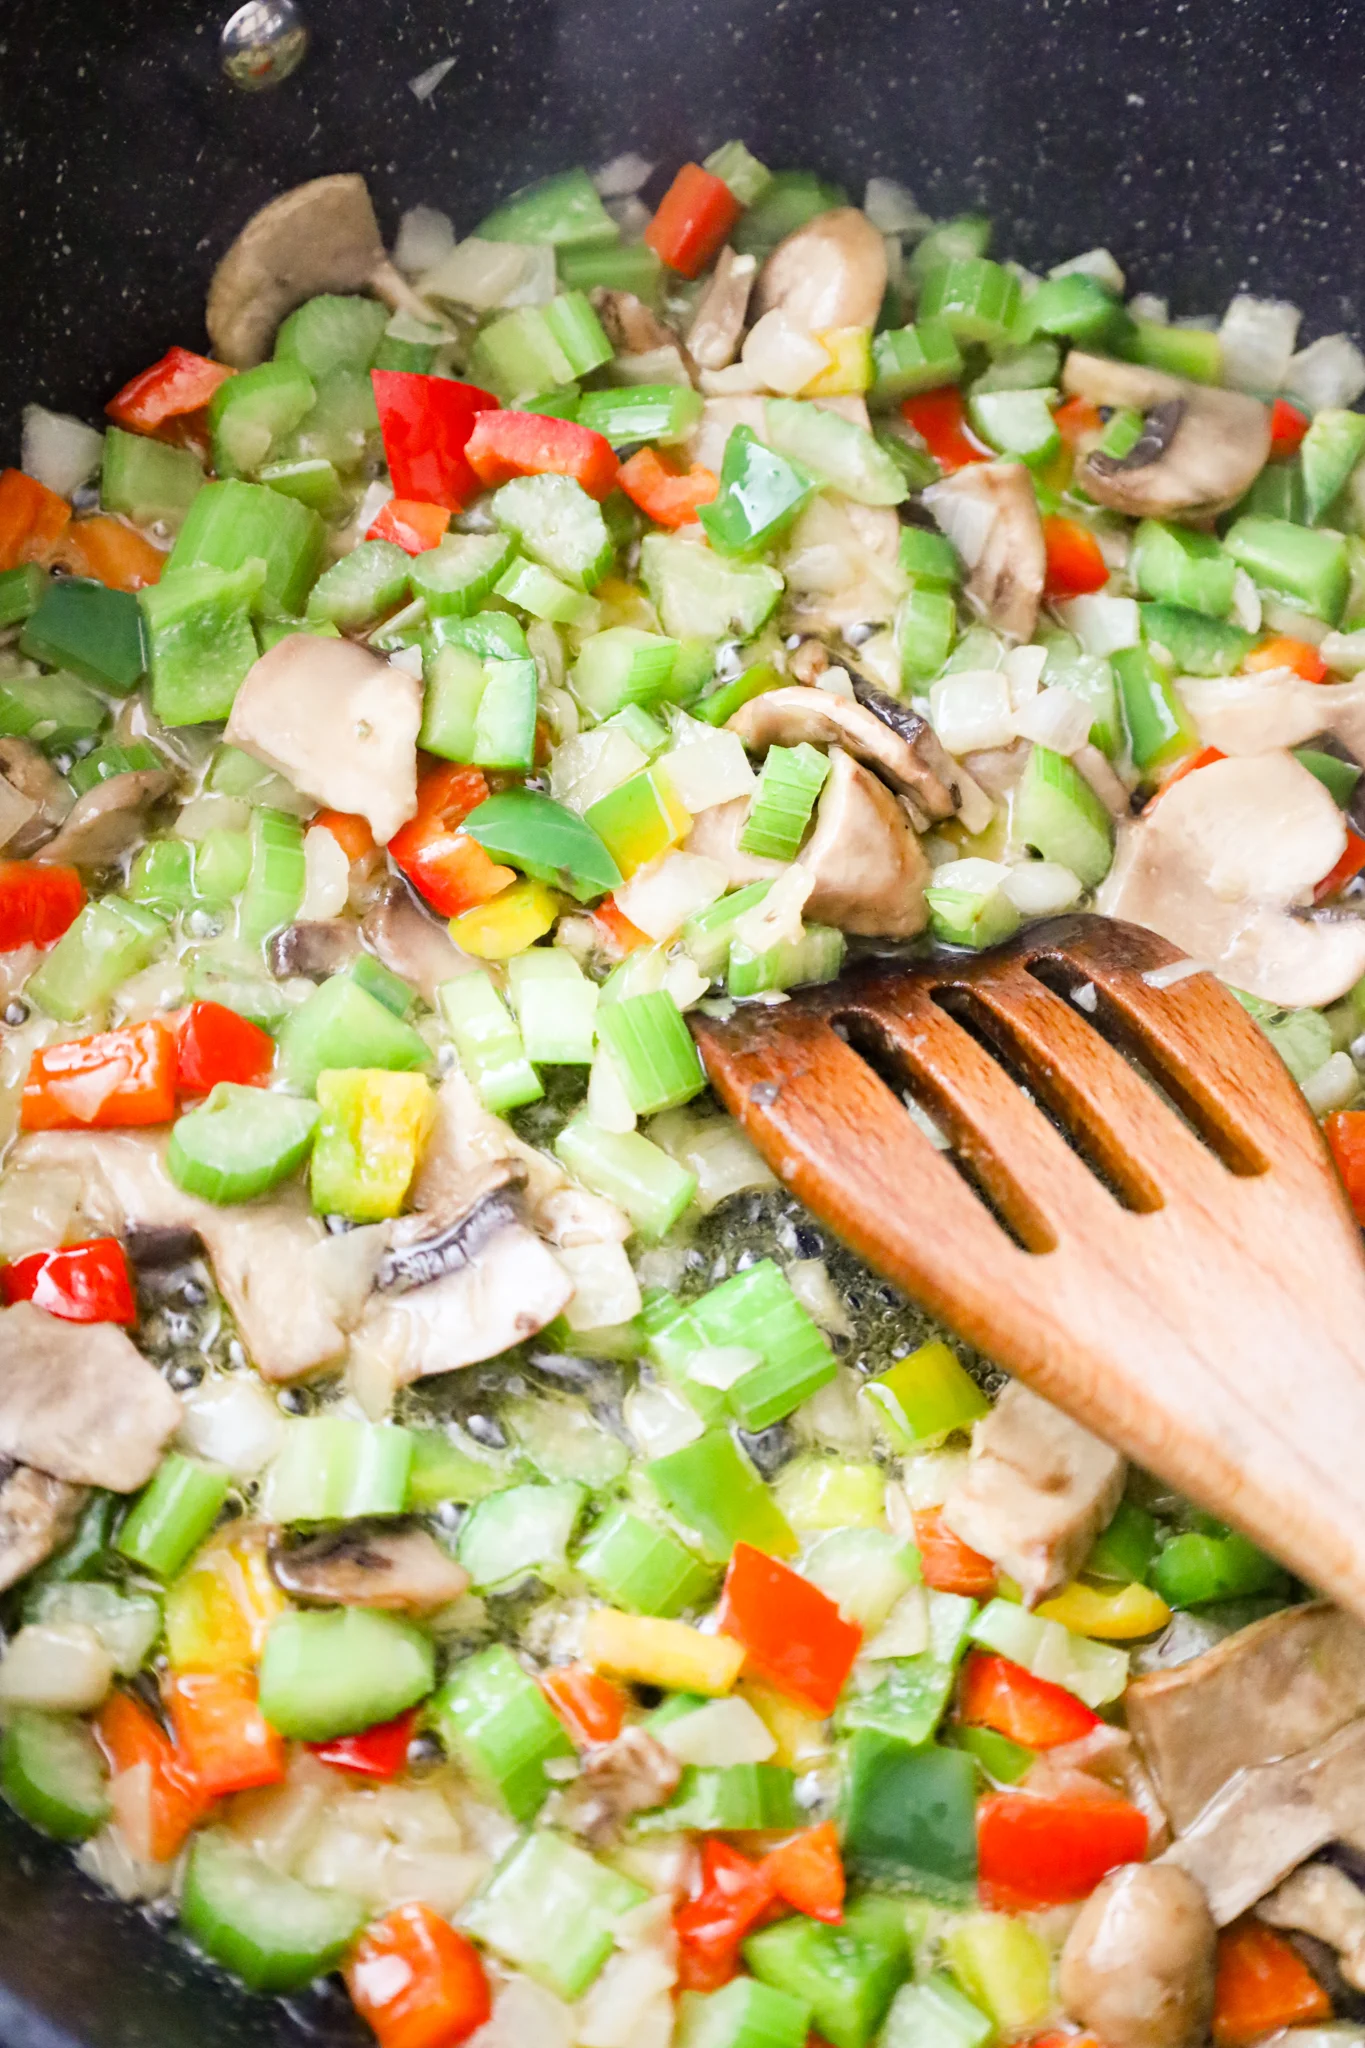 diced vegetables cooking in a skillet